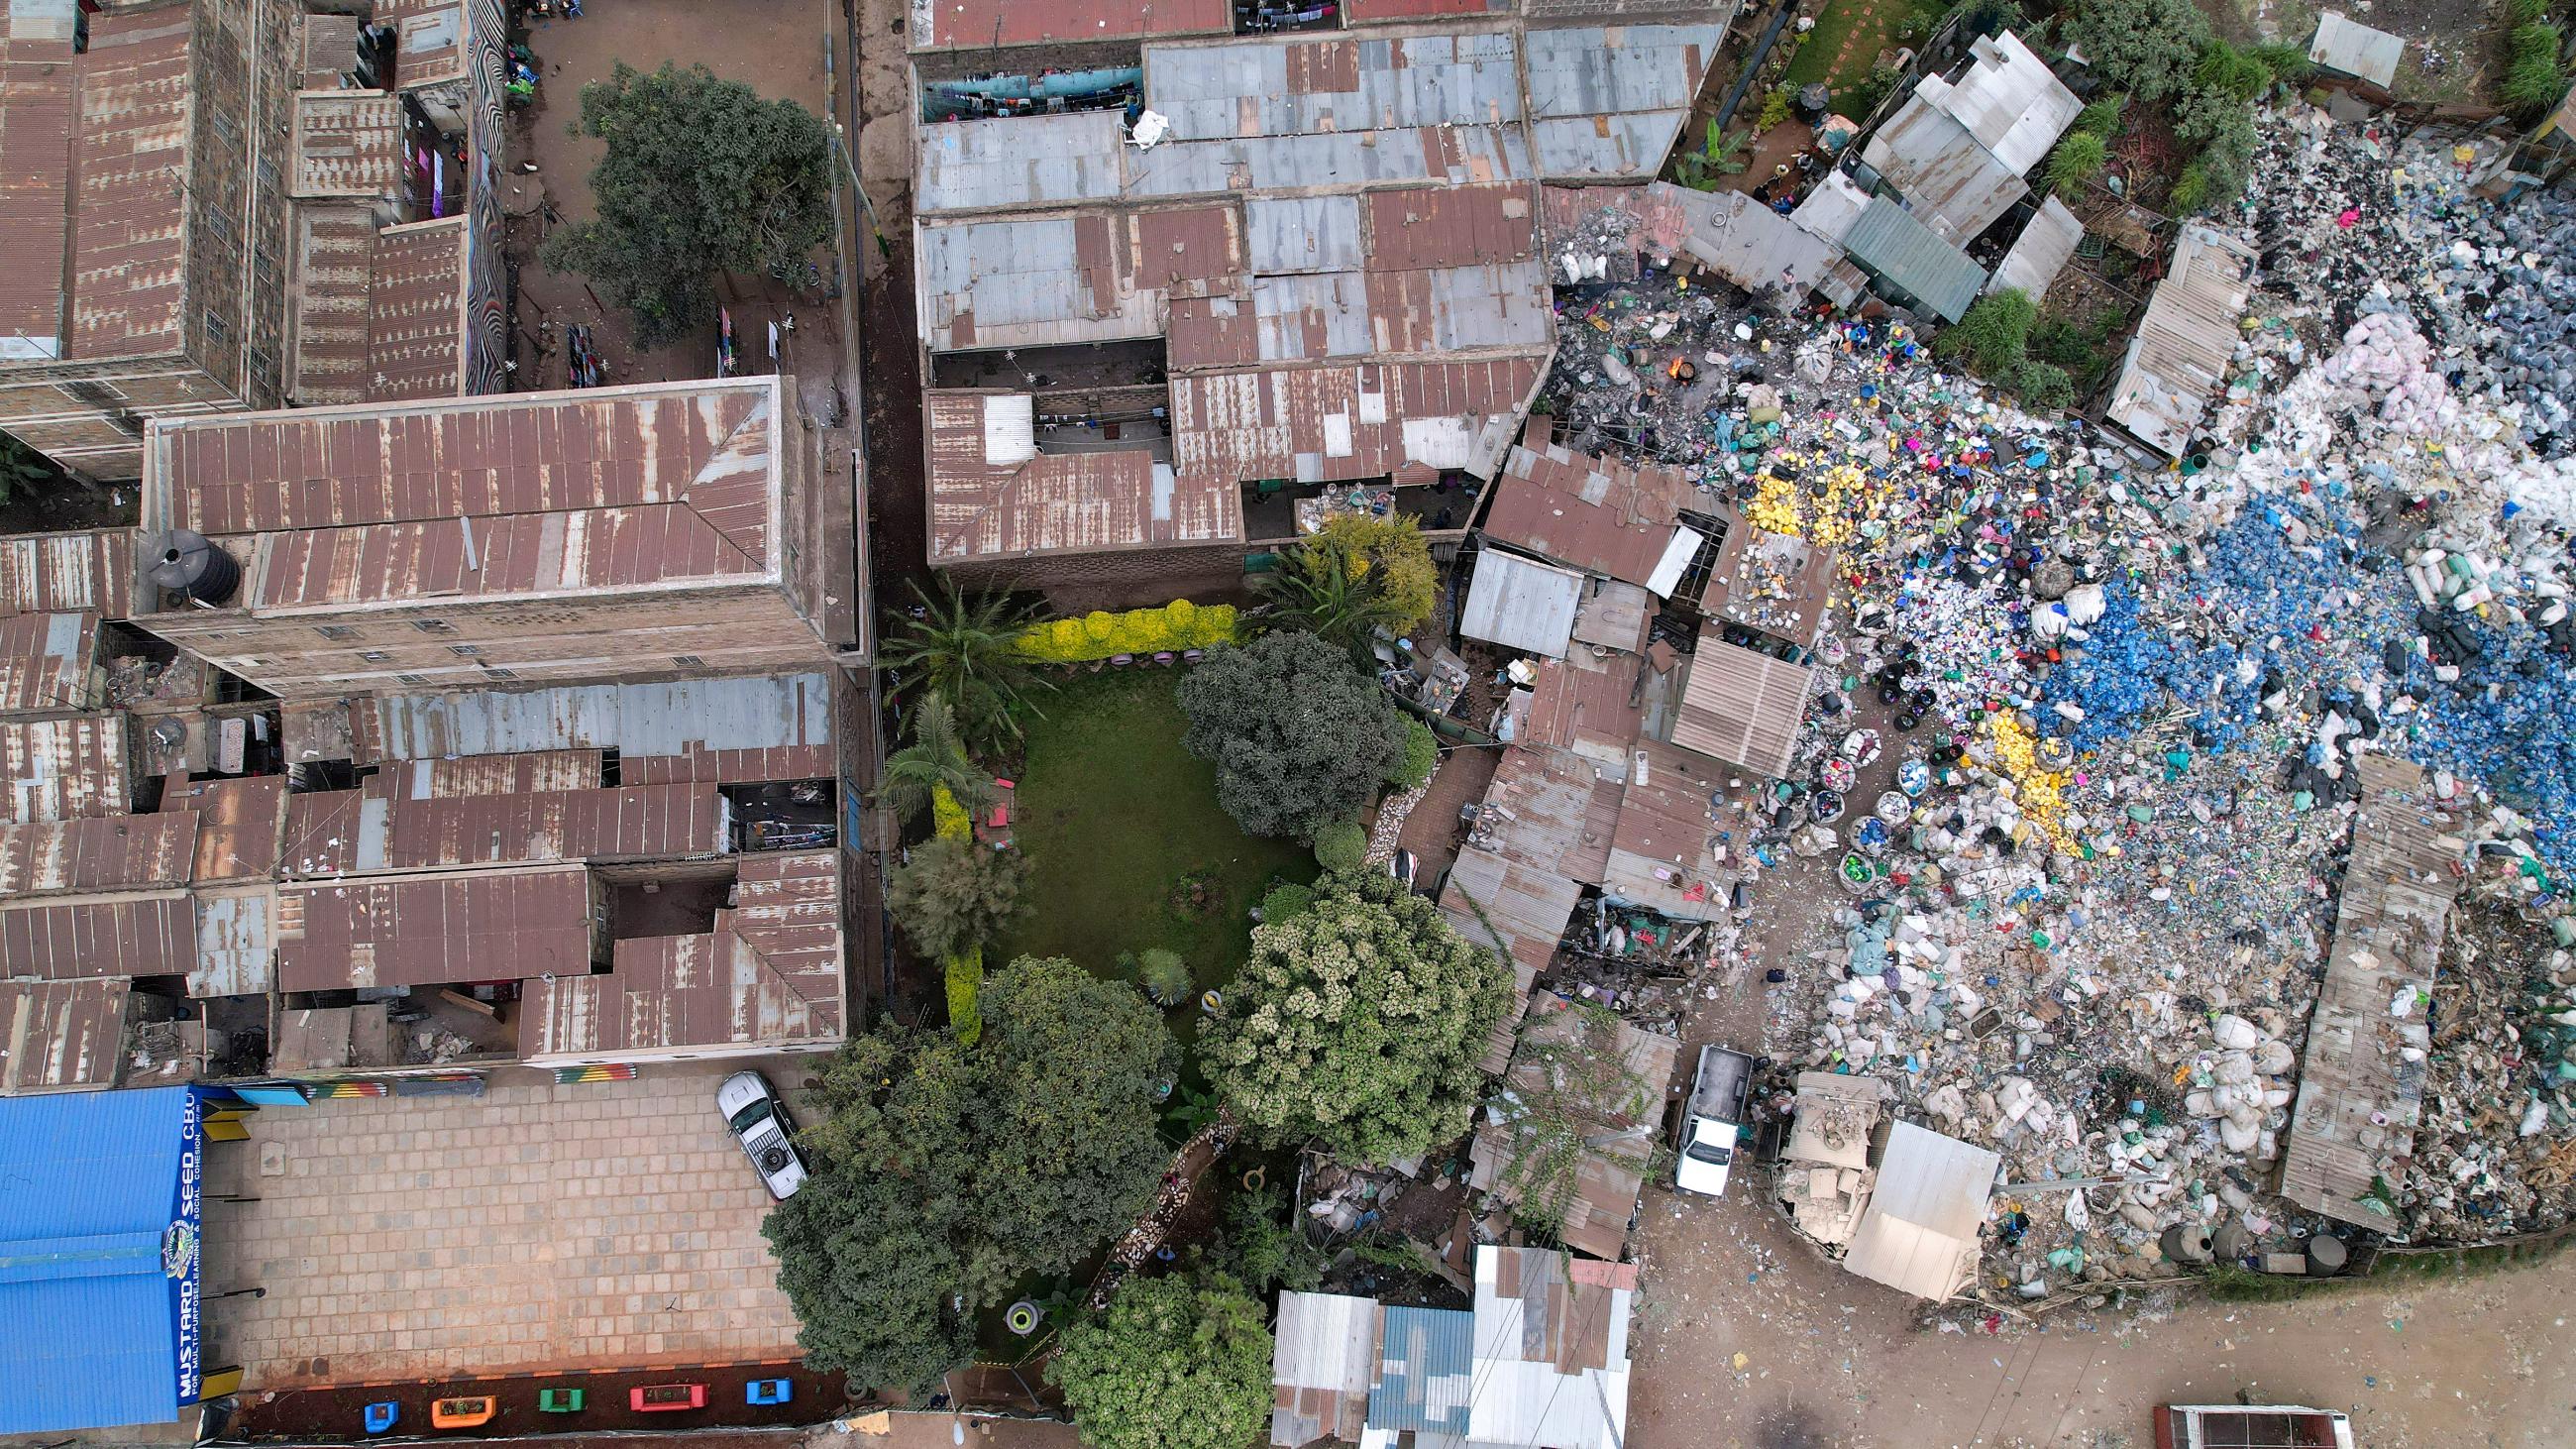 An aerial image, taken by a drone, of the Dandora community garden in a suburb of Nairobi, Kenya (2021).